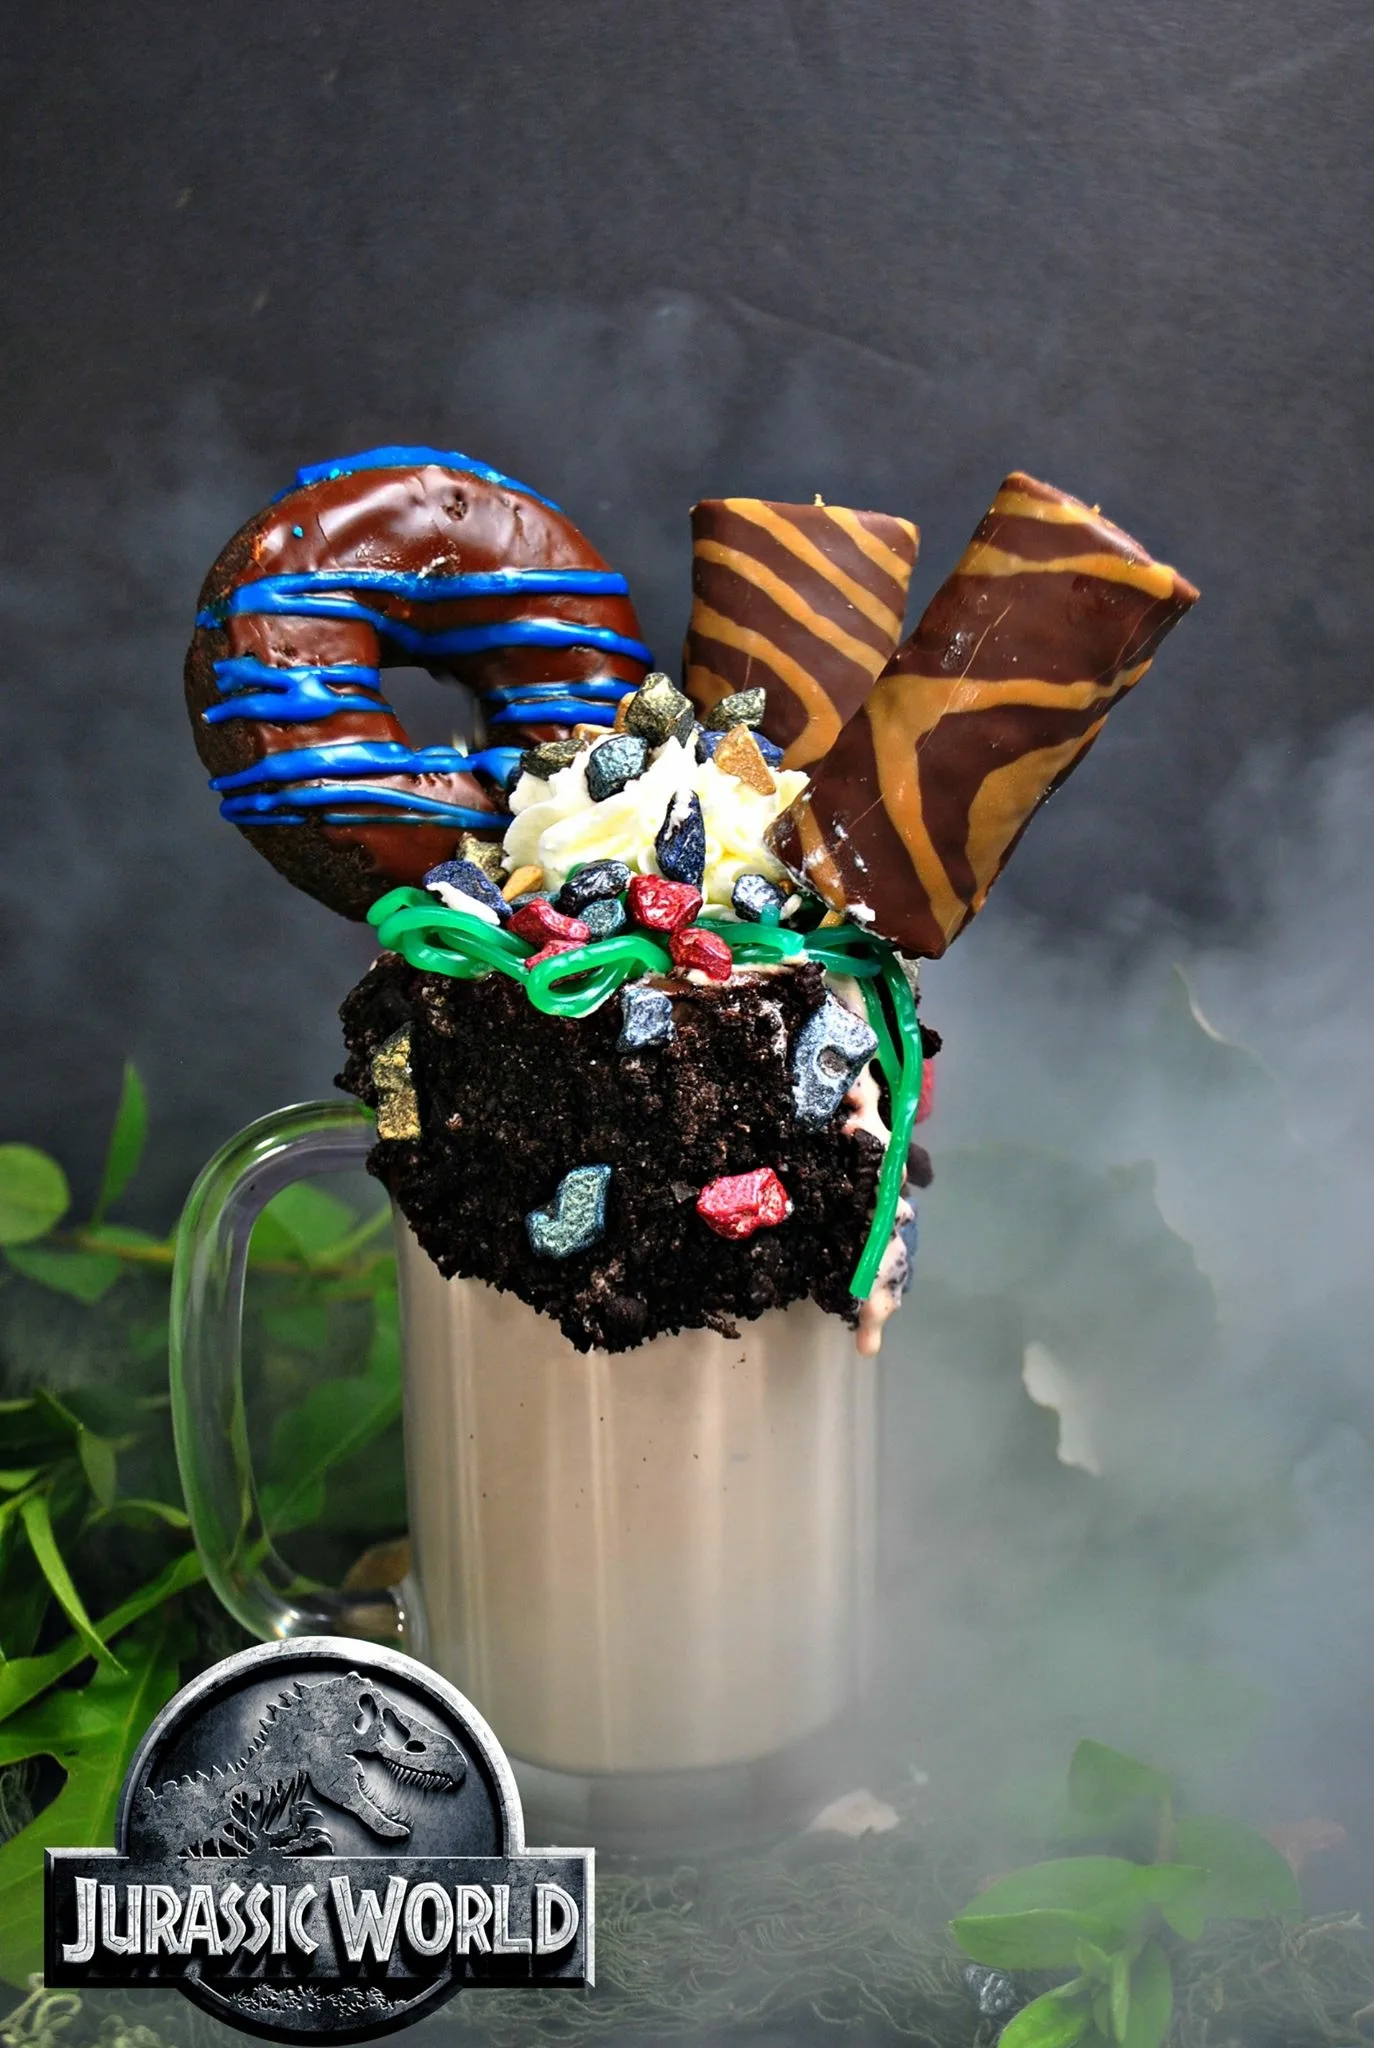 Inspired by the Jurassic World films, this dinosaur milkshake recipe is over-the-top "freakshake" style. Make it with the kid and enjoy together. #JurassicWorld #FallenKingdom #Dinosaur #Freakshake #Milkshake #Dessert